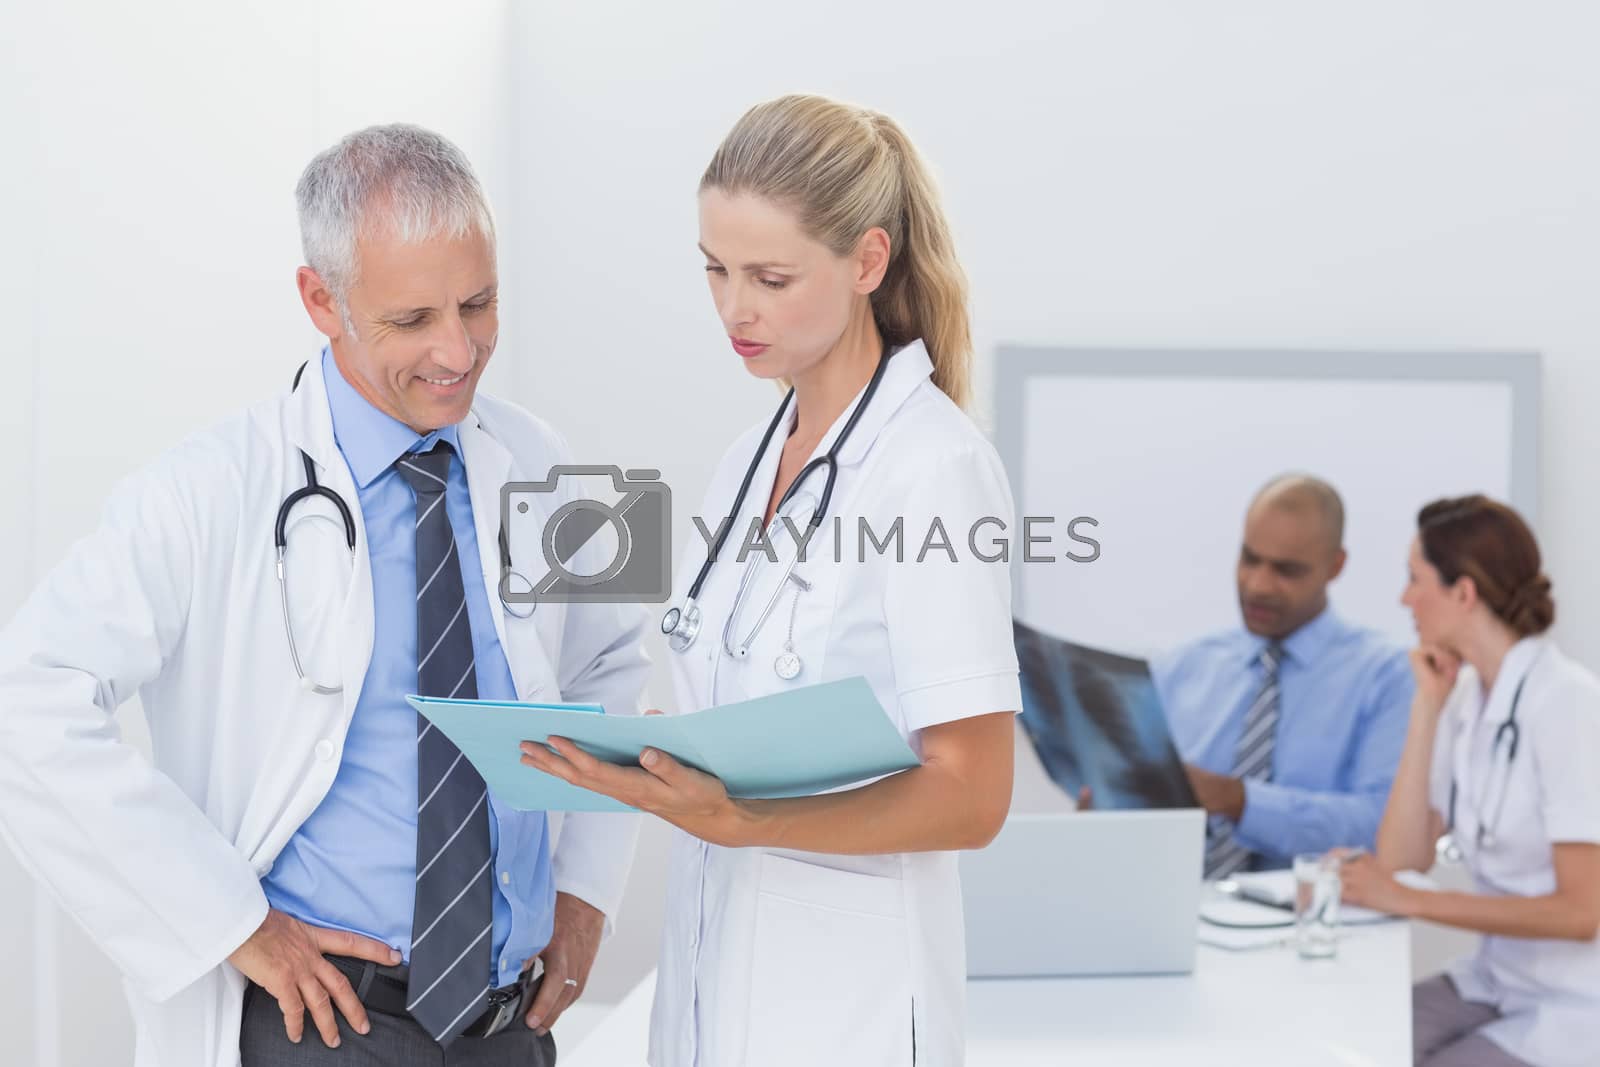 Royalty free image of Team of doctors working on their files by Wavebreakmedia